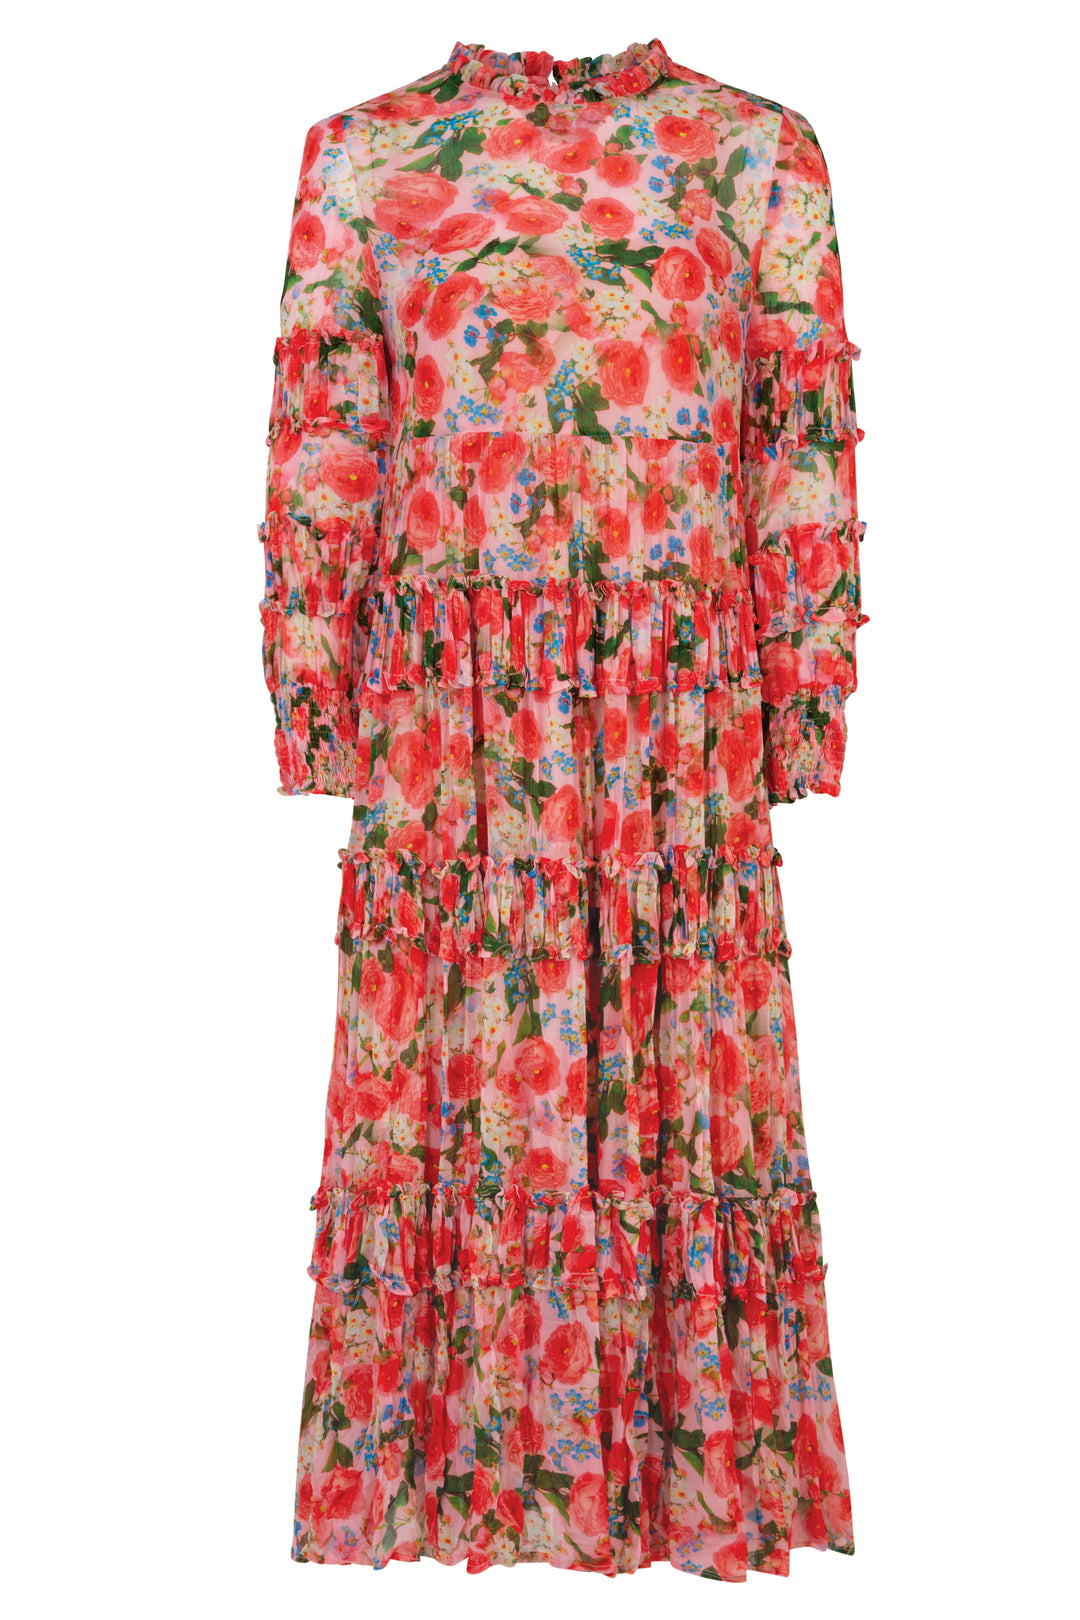 NEITHER HERE NOR TIER Dress (PINK FLORAL)